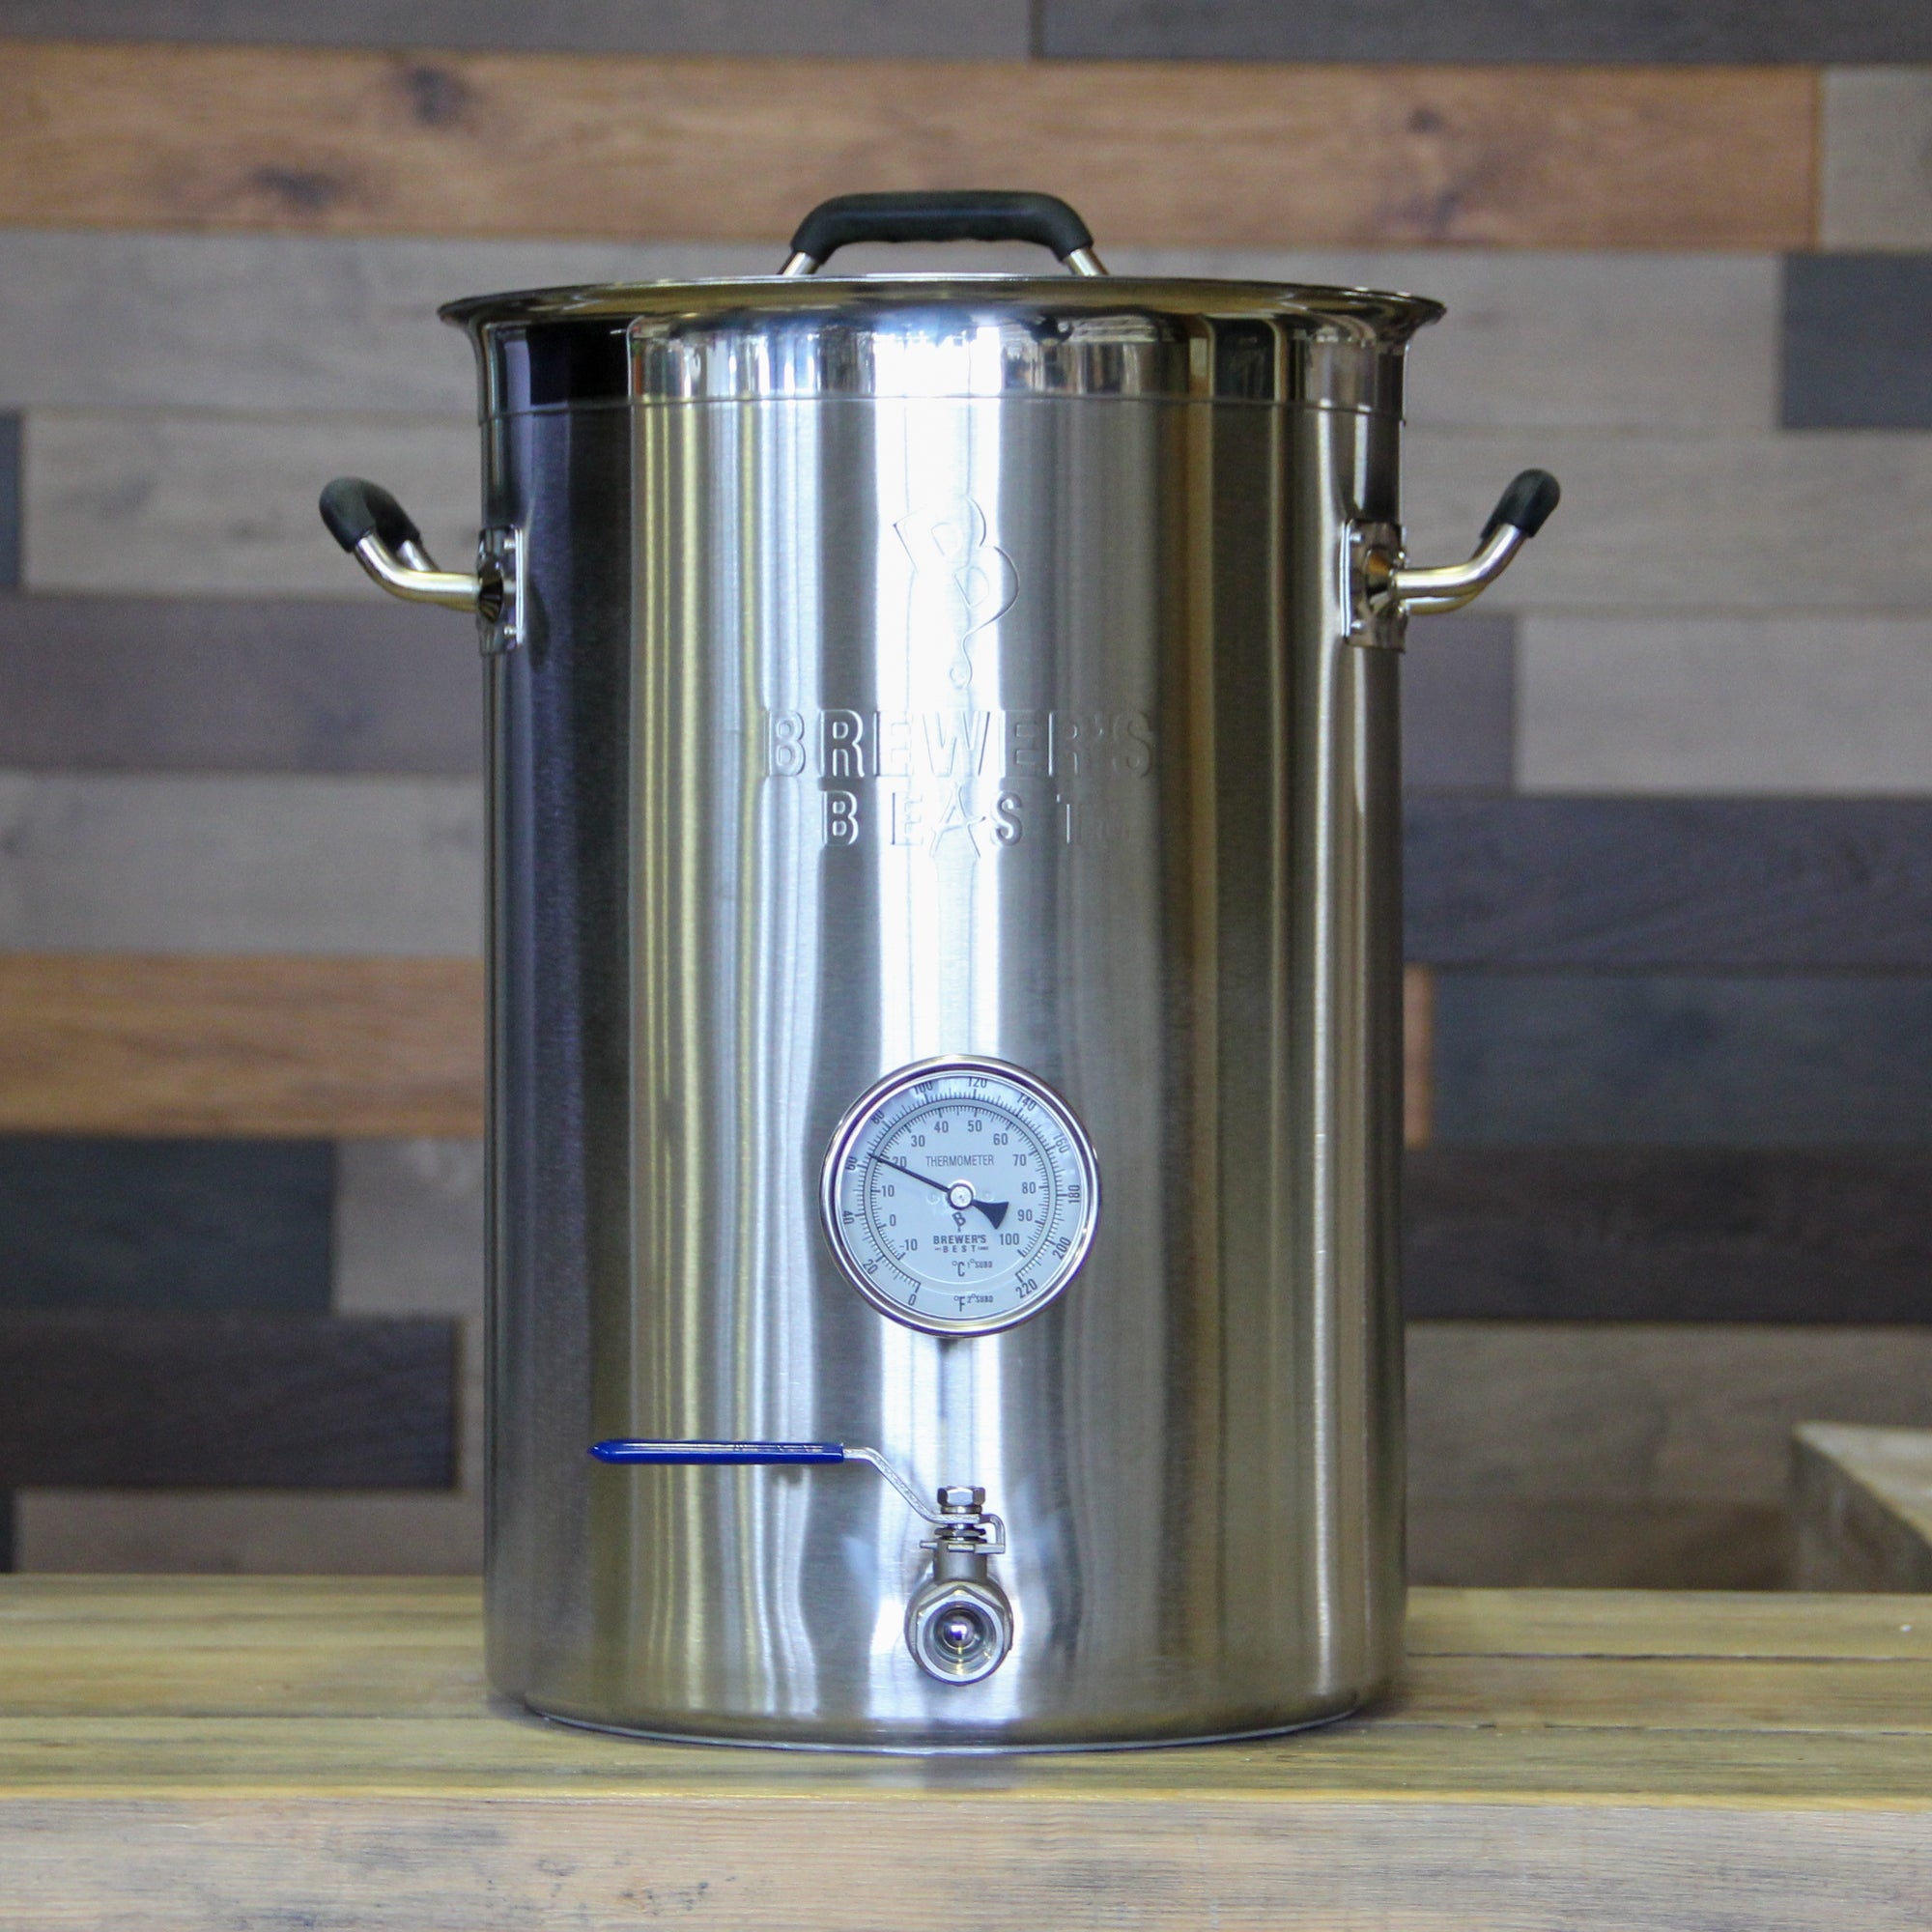 8 Gallon Brewers Beast Kettle w/Ball Valve & Thermometer